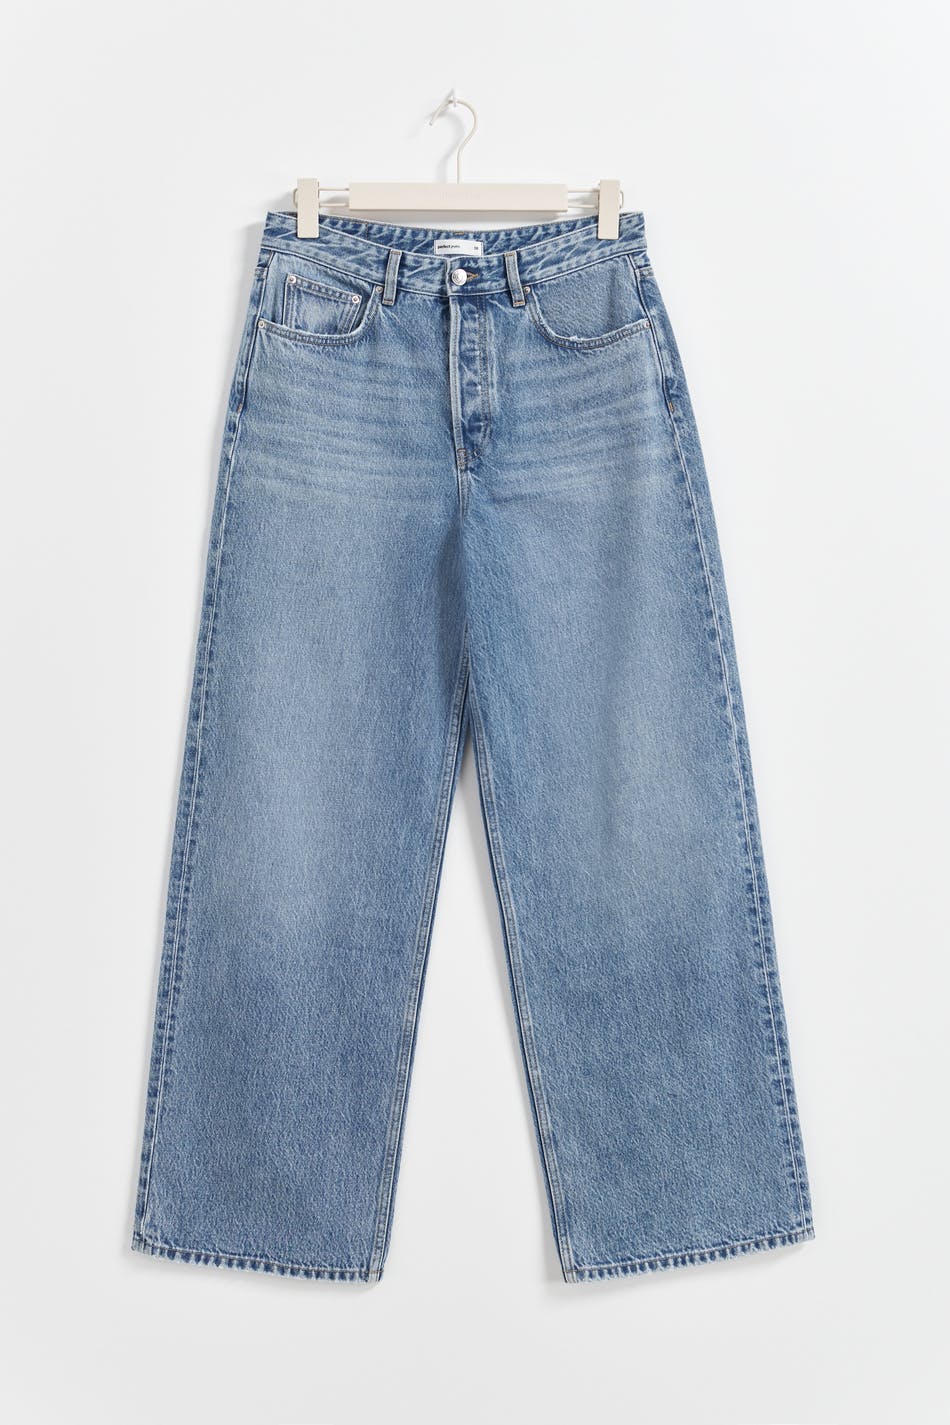 Gina Tricot - Baggy tall wide jeans - loose jeans - Blue - 40 - Female